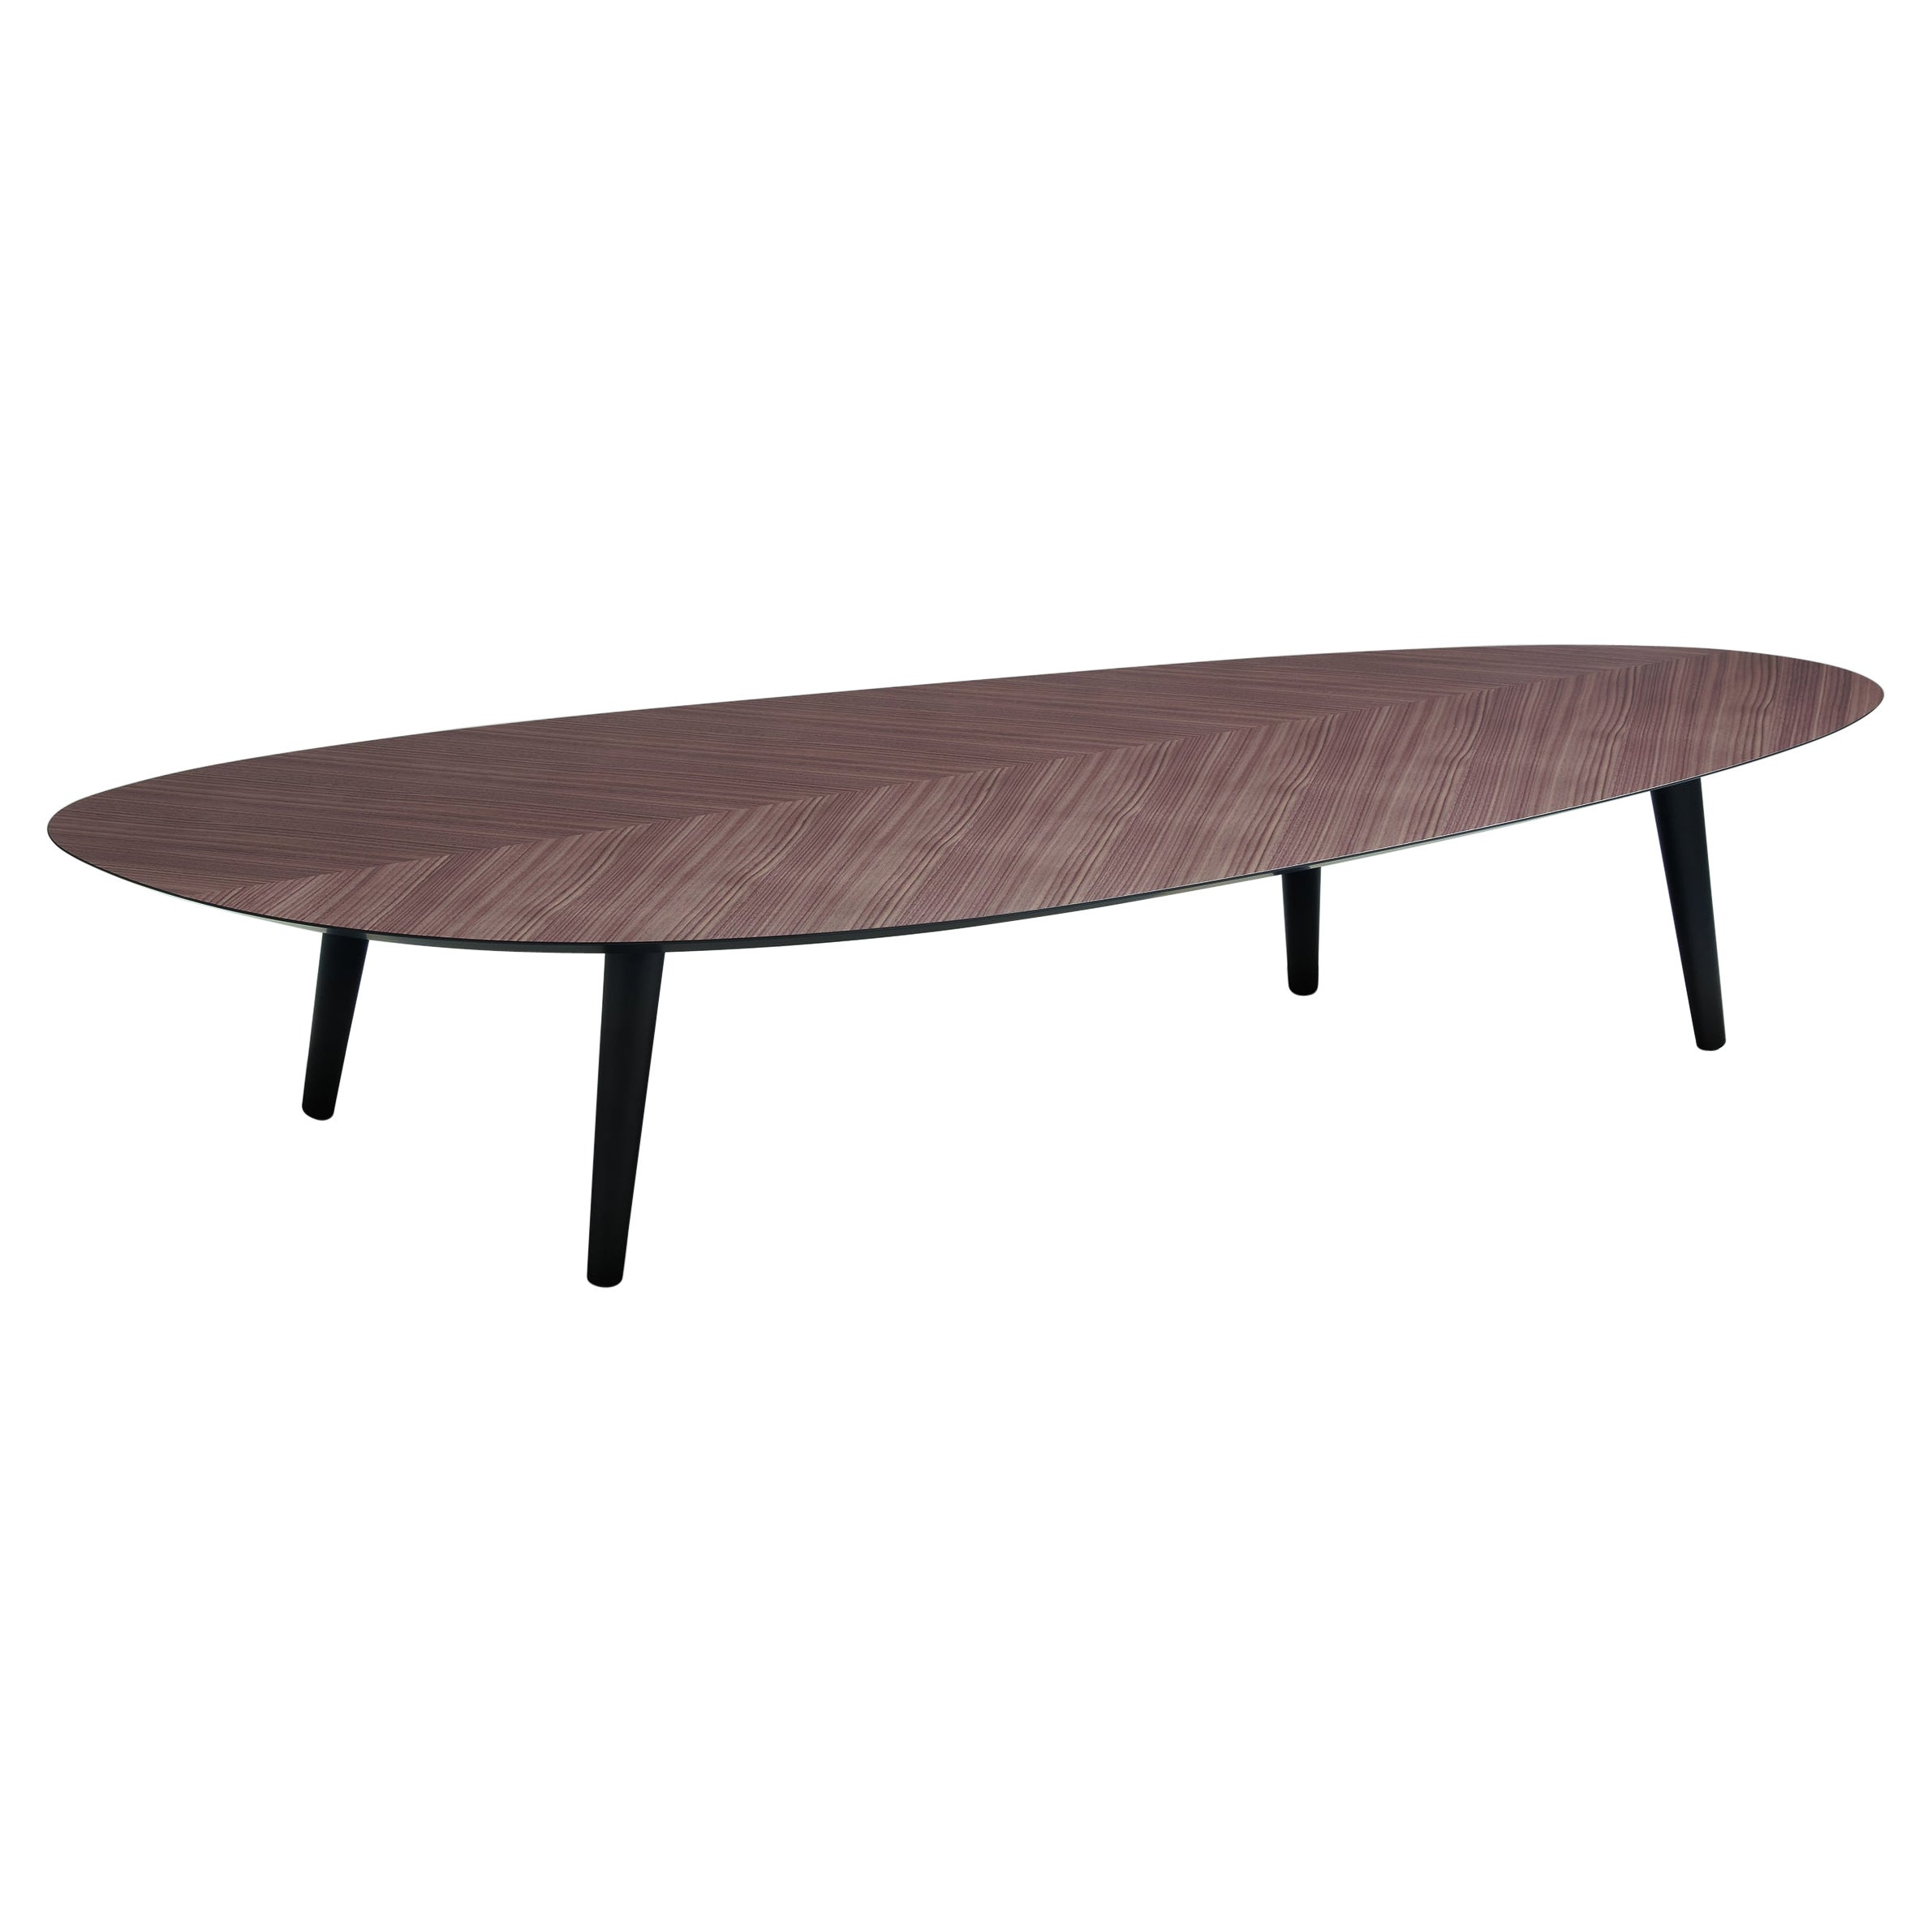 Zanotta Large Tweed Mini Table in Canaletto Walnut Top with Black Frame